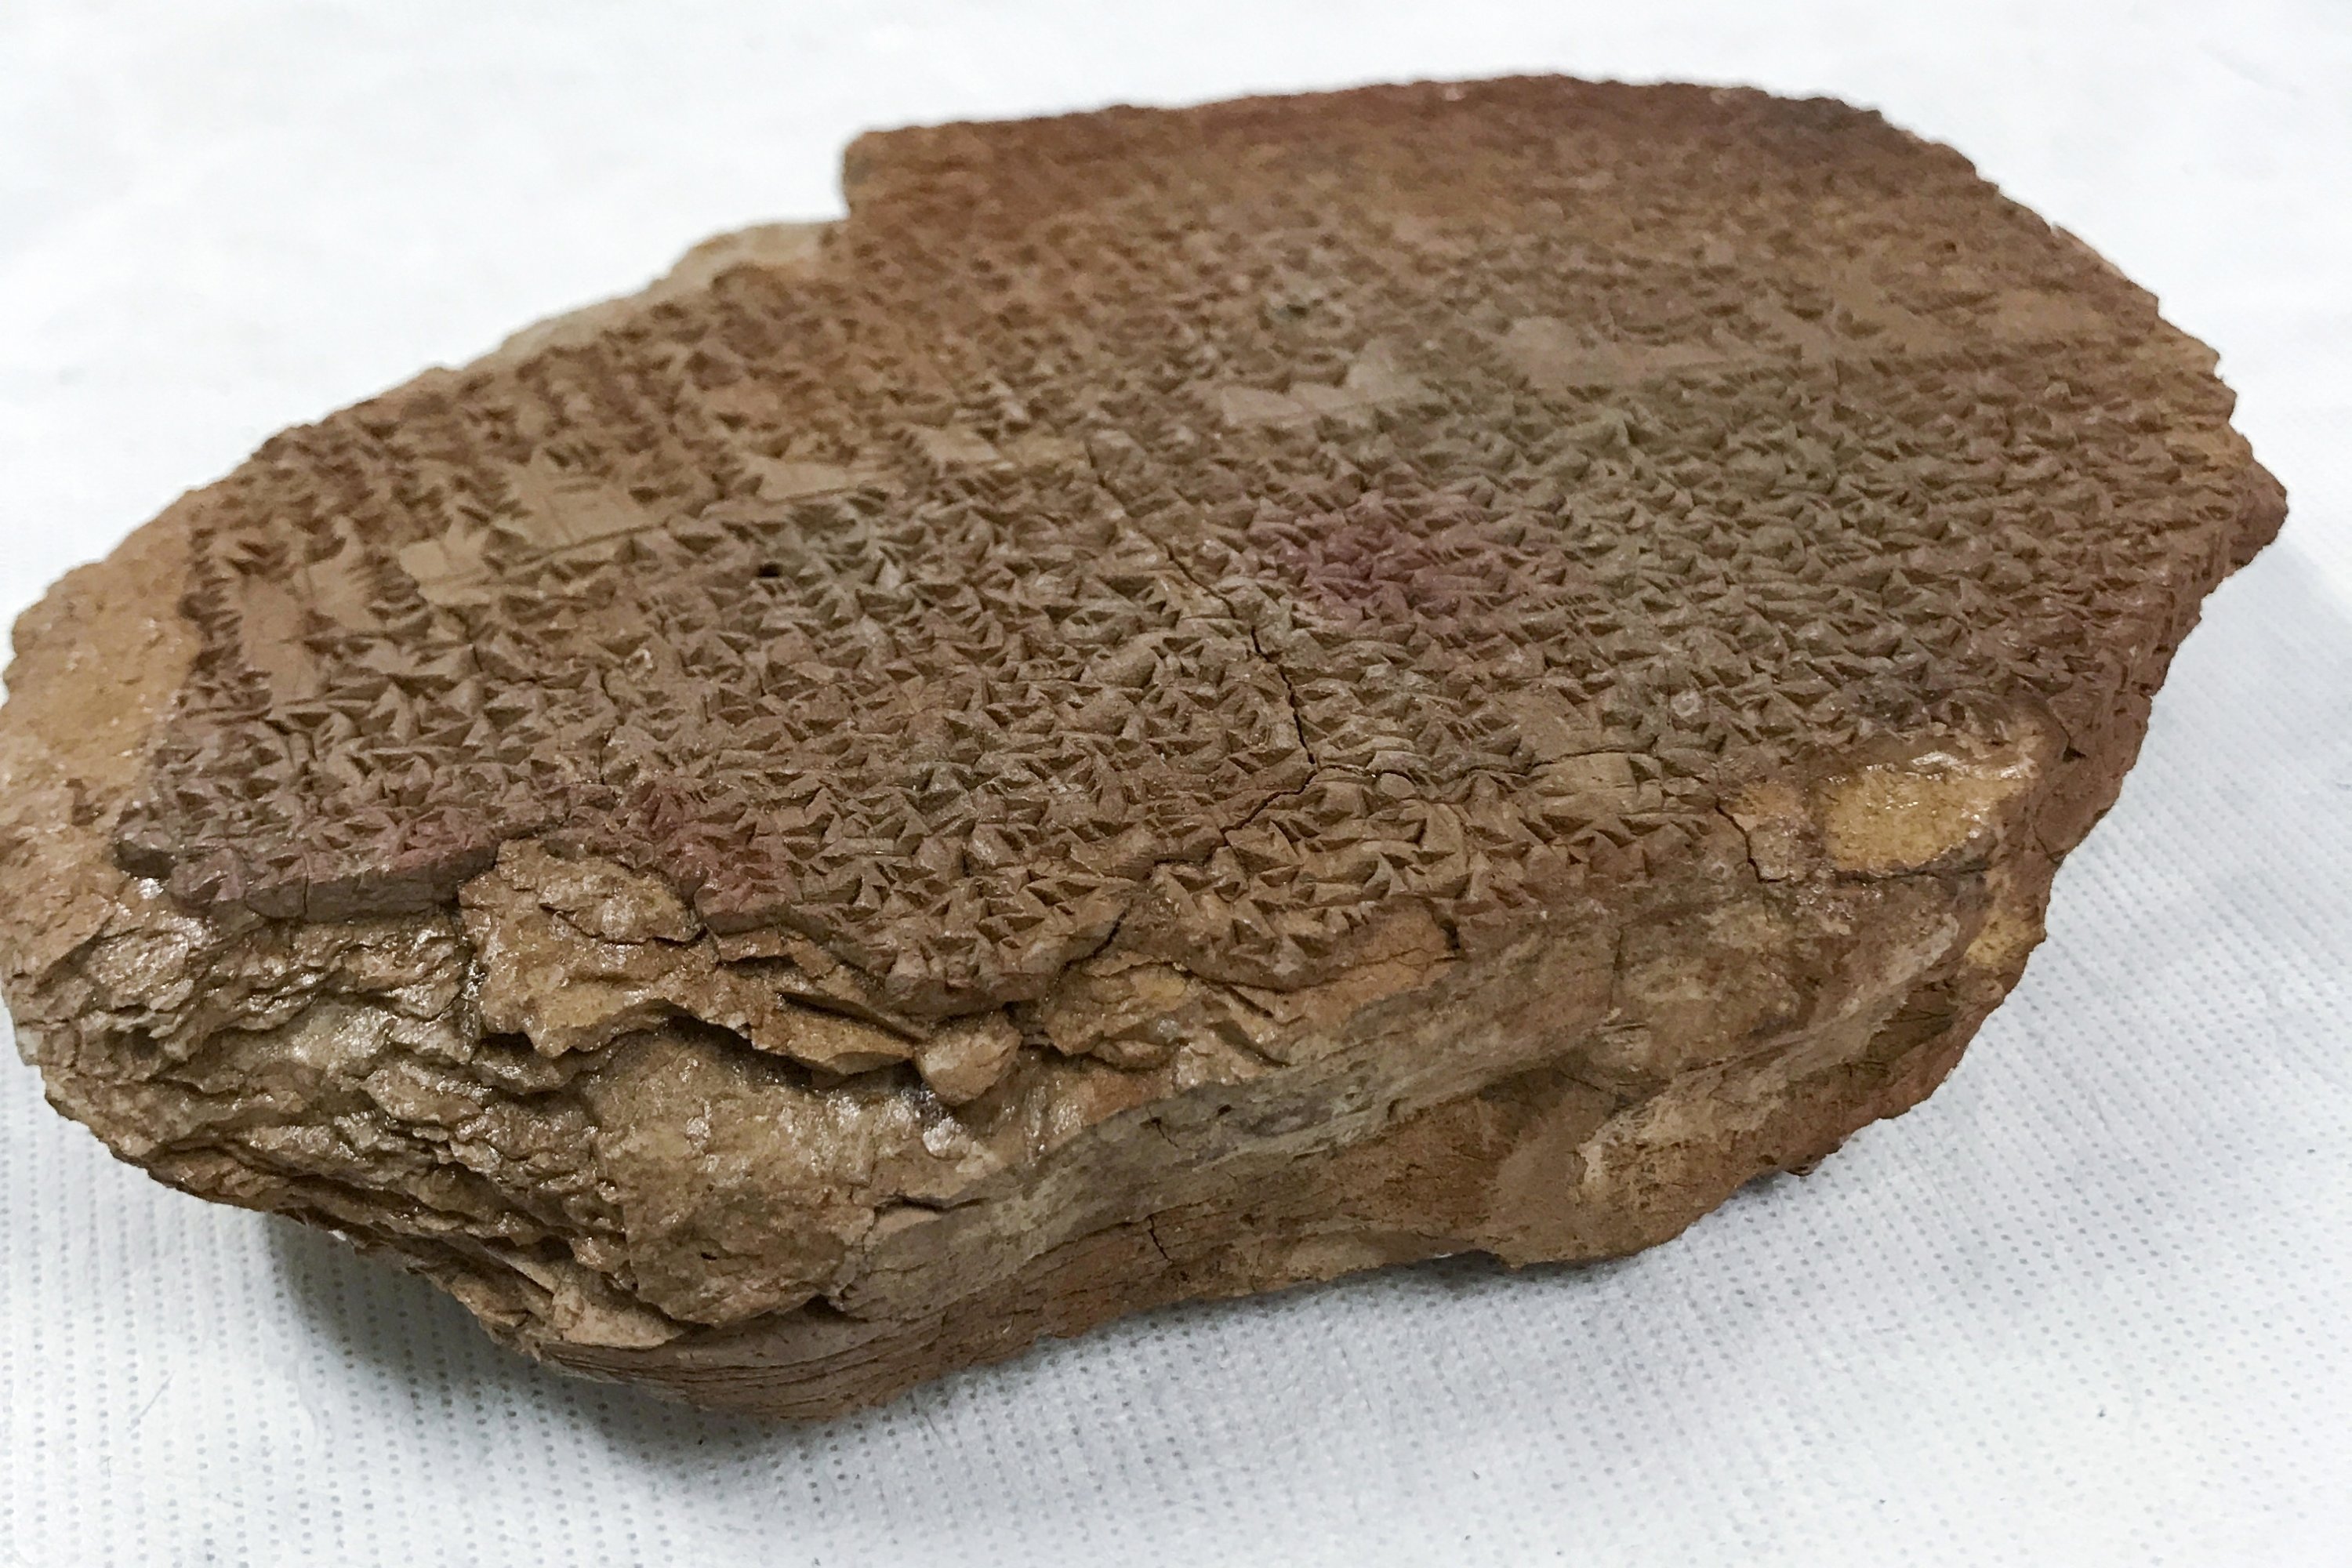 This undated image provided by the U.S. Immigration and Customs Enforcement’s office of public affairs shows a 3,500-year-old artifact, known as the Gilgamesh Dream Tablet. The tablet contains a portion of the Epic of Gilgamesh, considered one of the earliest surviving works of notable literature. (U.S. Immigration and Customs Enforcement via AP)